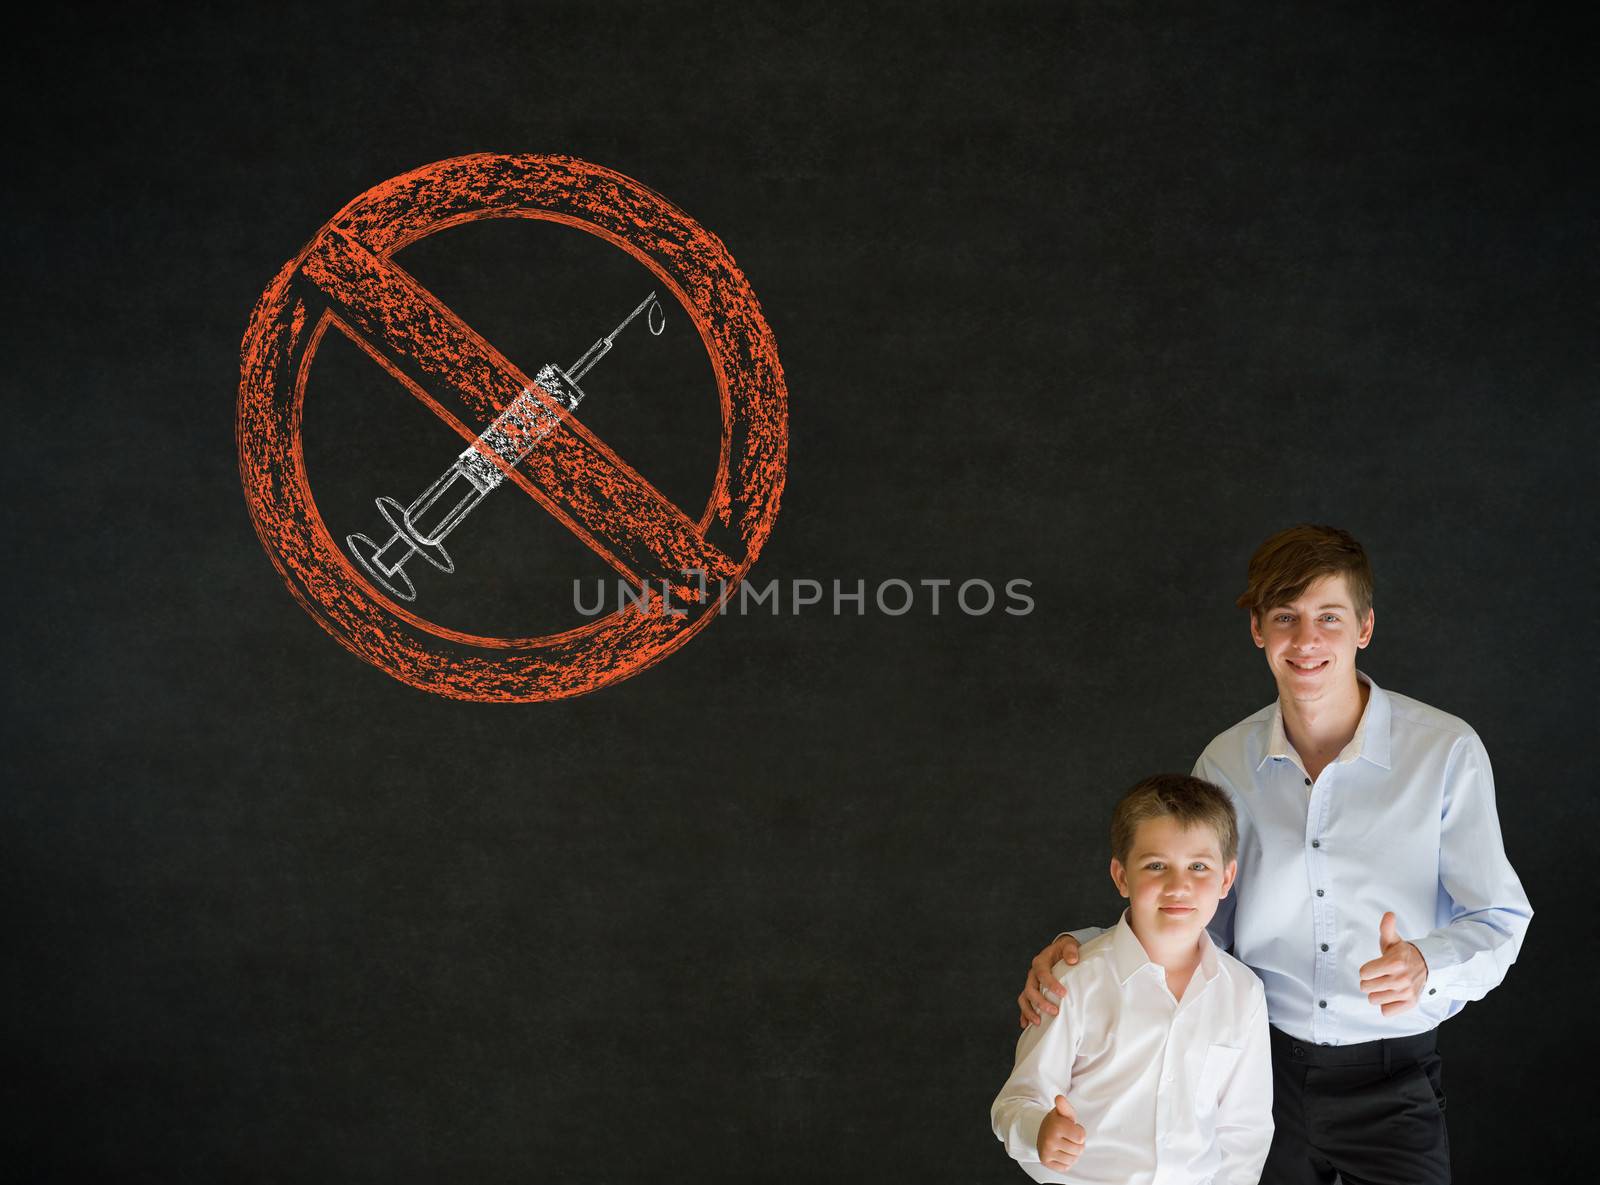 Thumbs up boy dressed up as business man with teacher man and no drugs needle sign on blackboard background